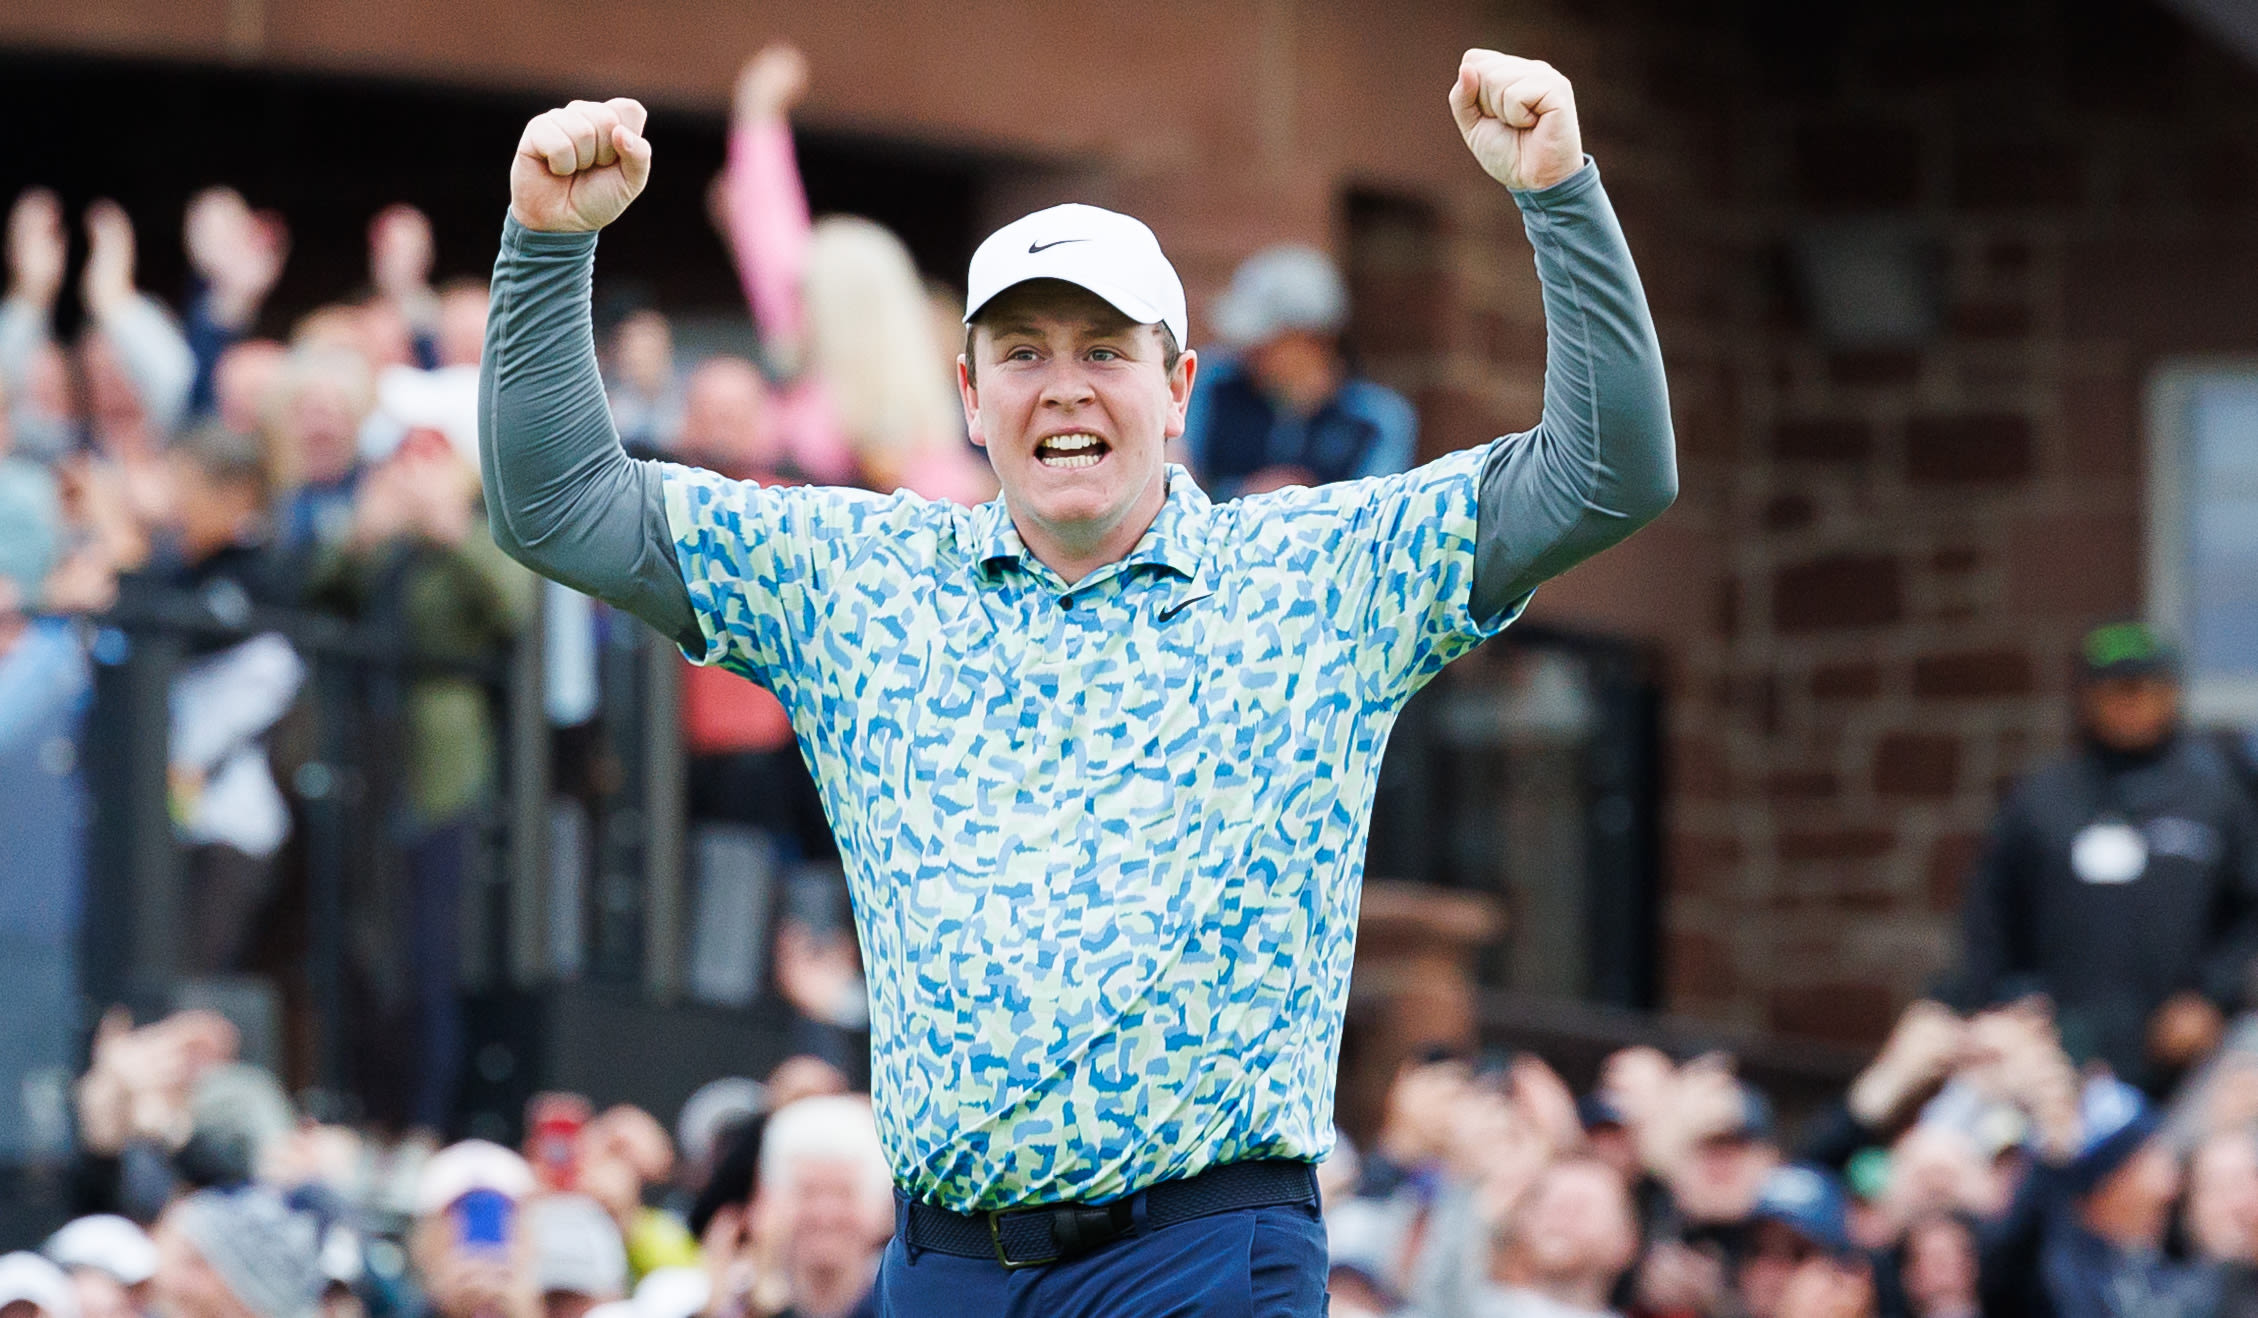 Robert MacIntyre rallies for historic win at Scottish Open, the home event he’s cared about most